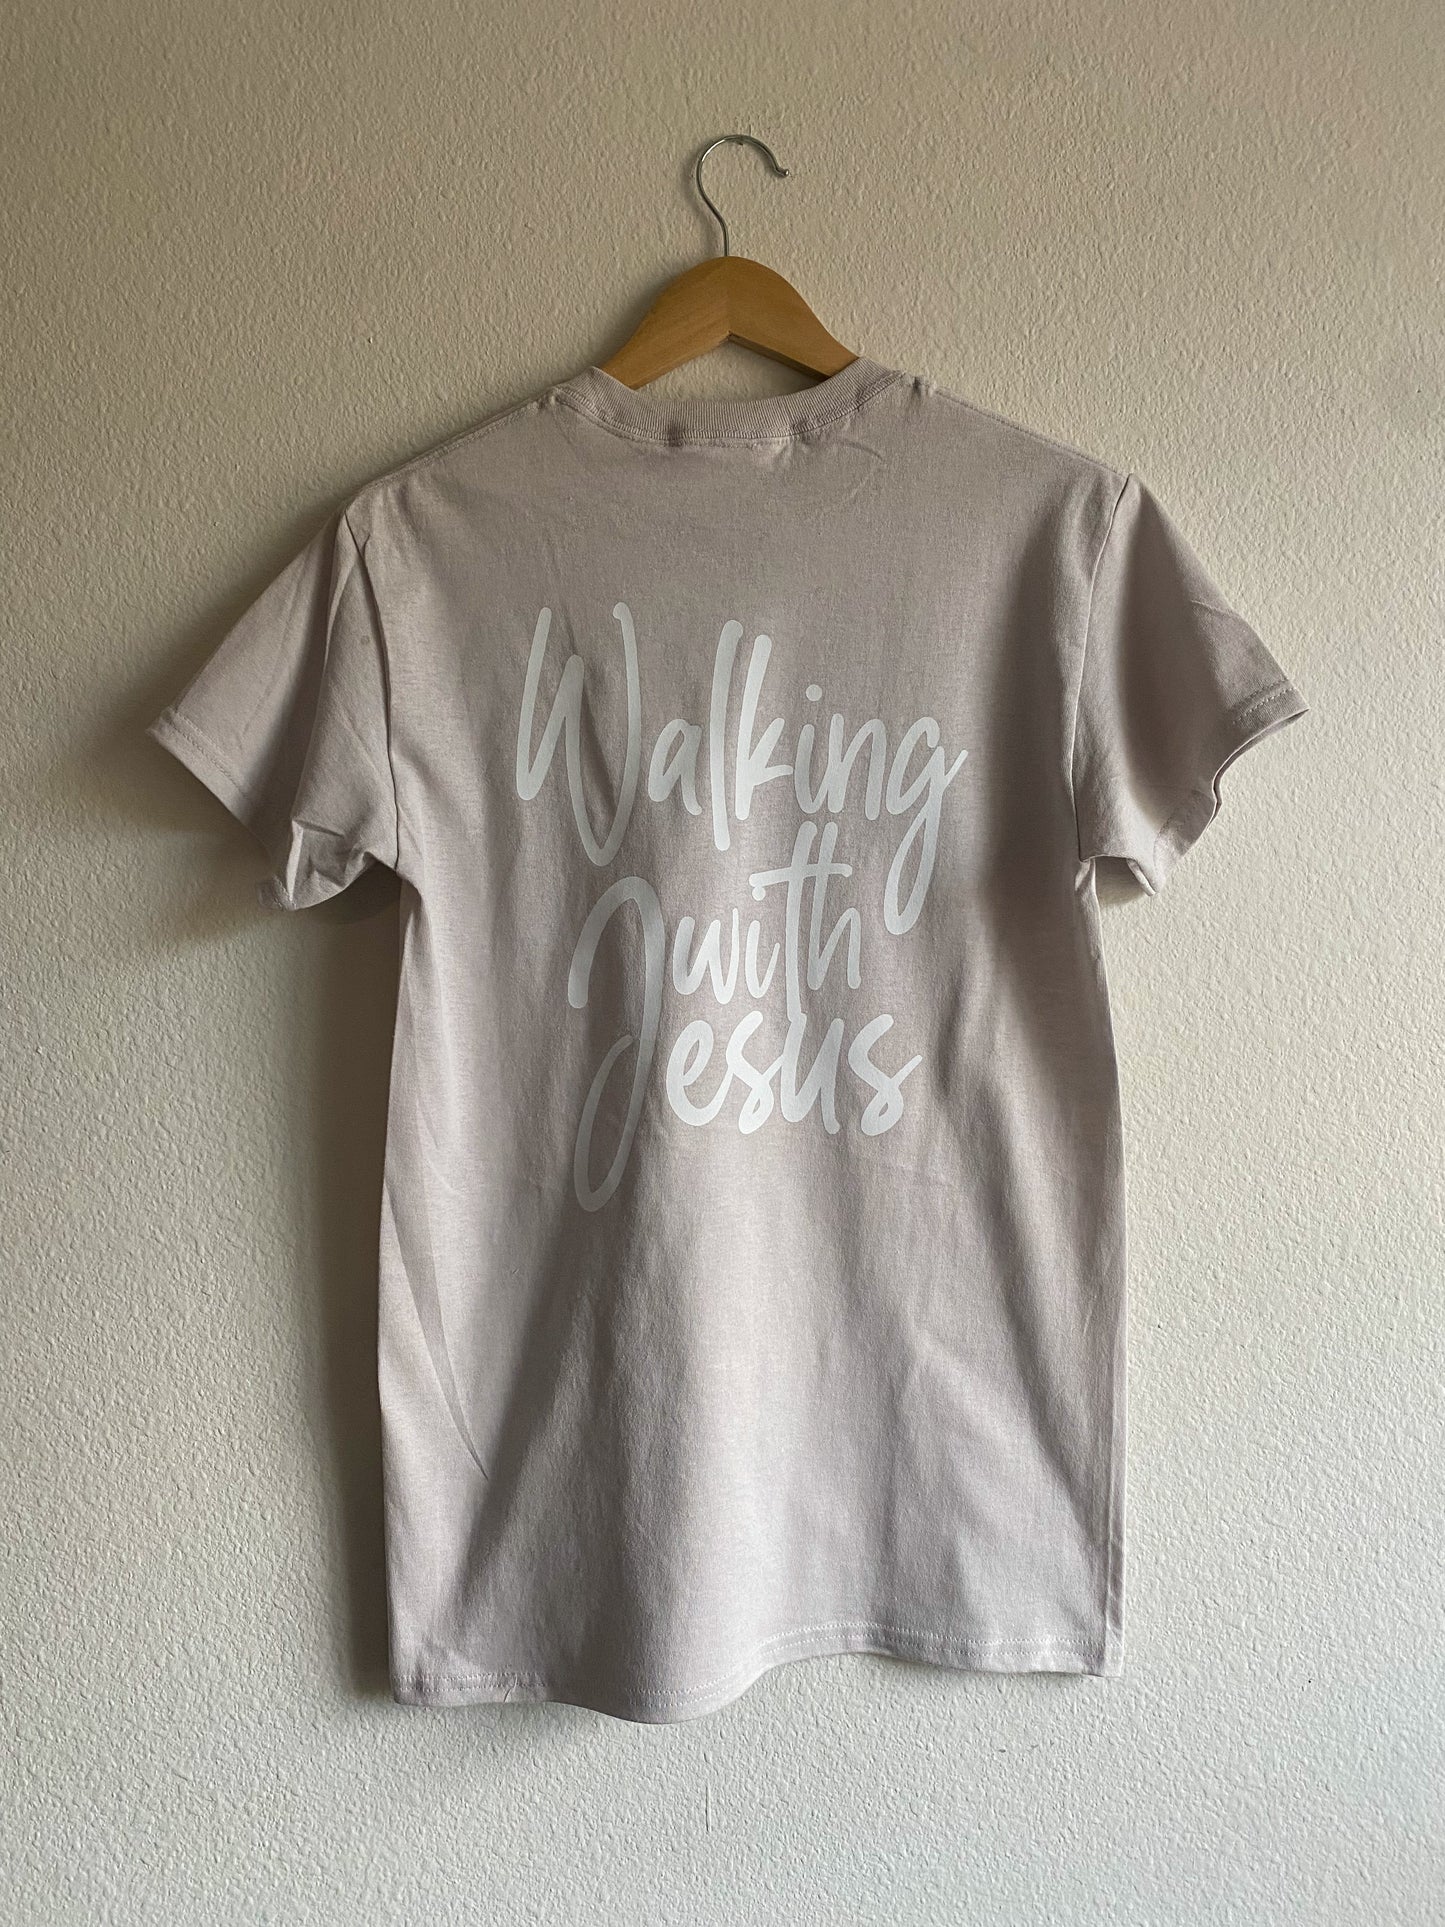 IMPERFECT Walking with Jesus Tee FINAL SALE